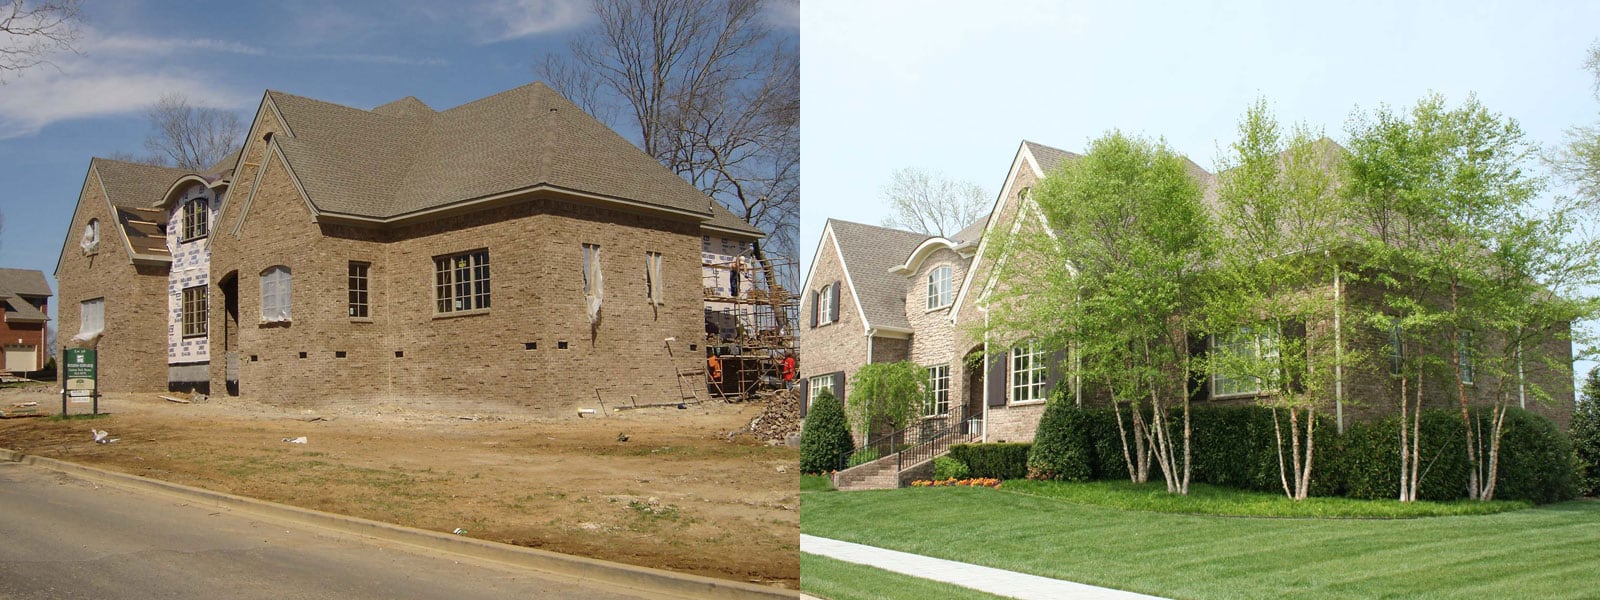 Residential Home Landscaping Before and After